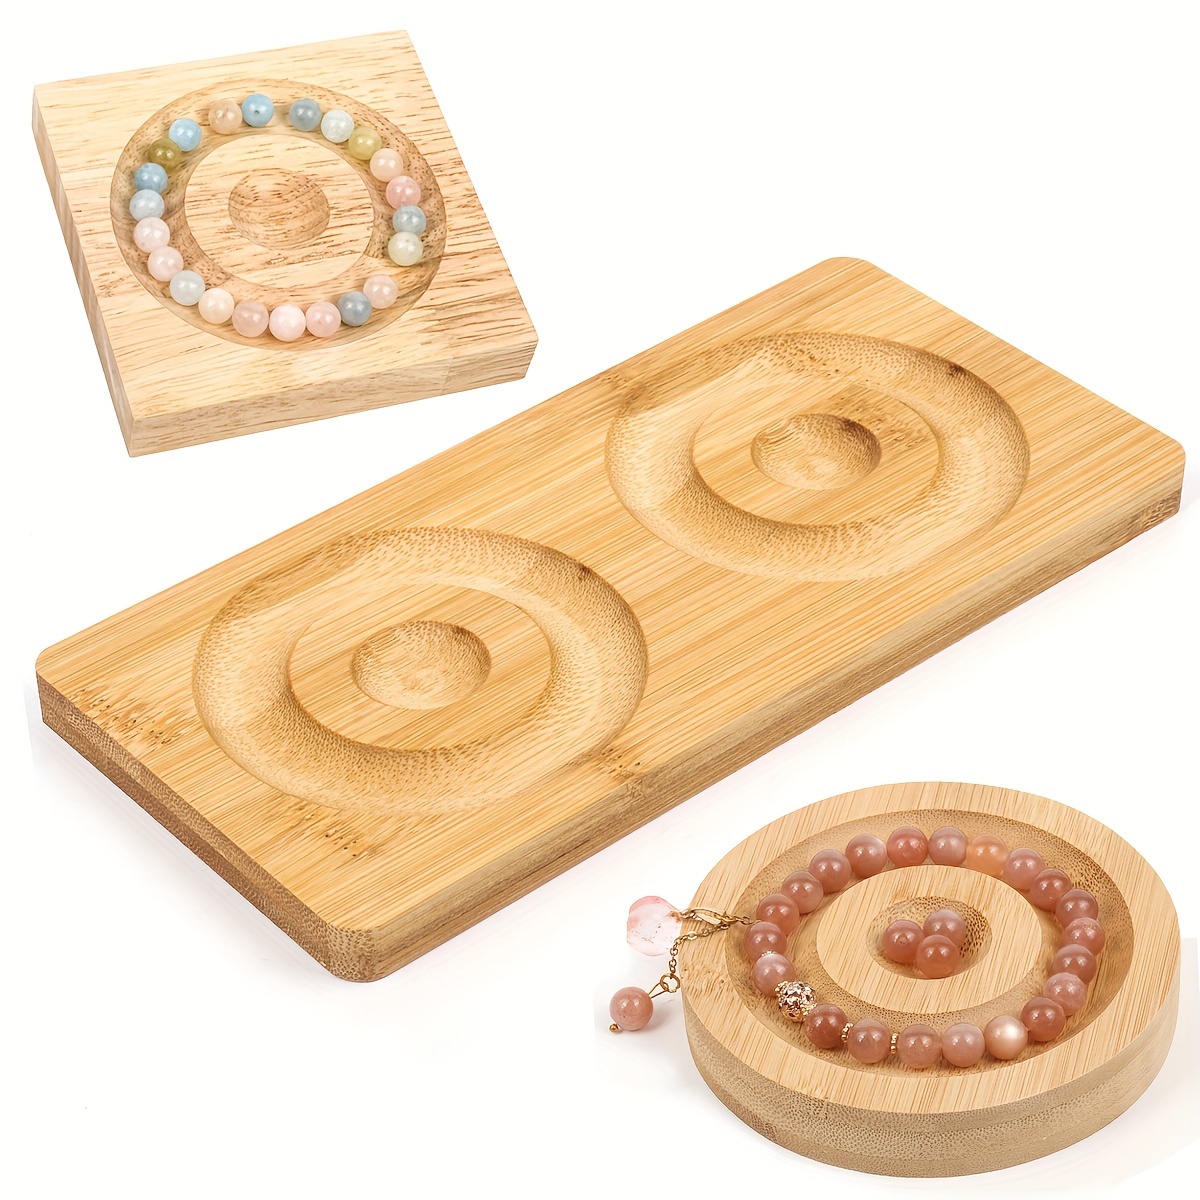 BENECREAT Wooden Bead Board Bead Design Board Bead Making Supplies Beading  Trays Mats 15x11.8 Inch for Bracelet Necklaces Jewelry Making DIY Design